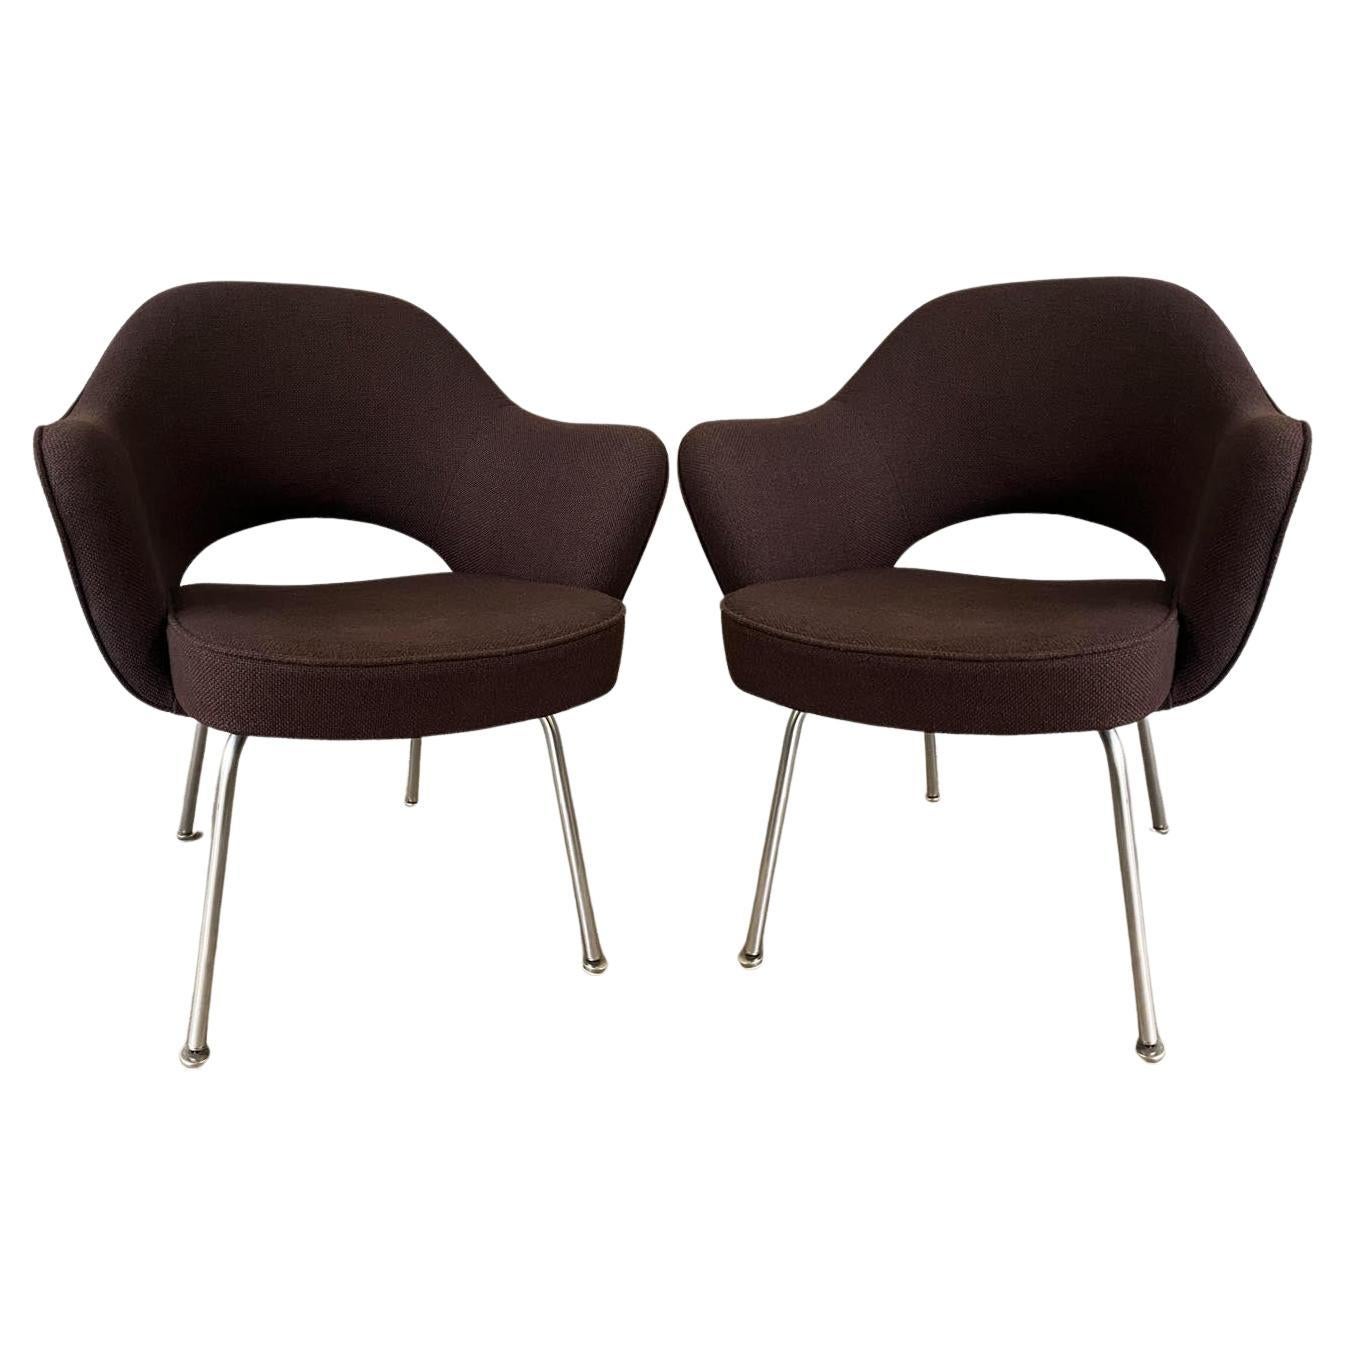 Pair of Brown Saarinen Executive / Dining Chairs or Knoll 